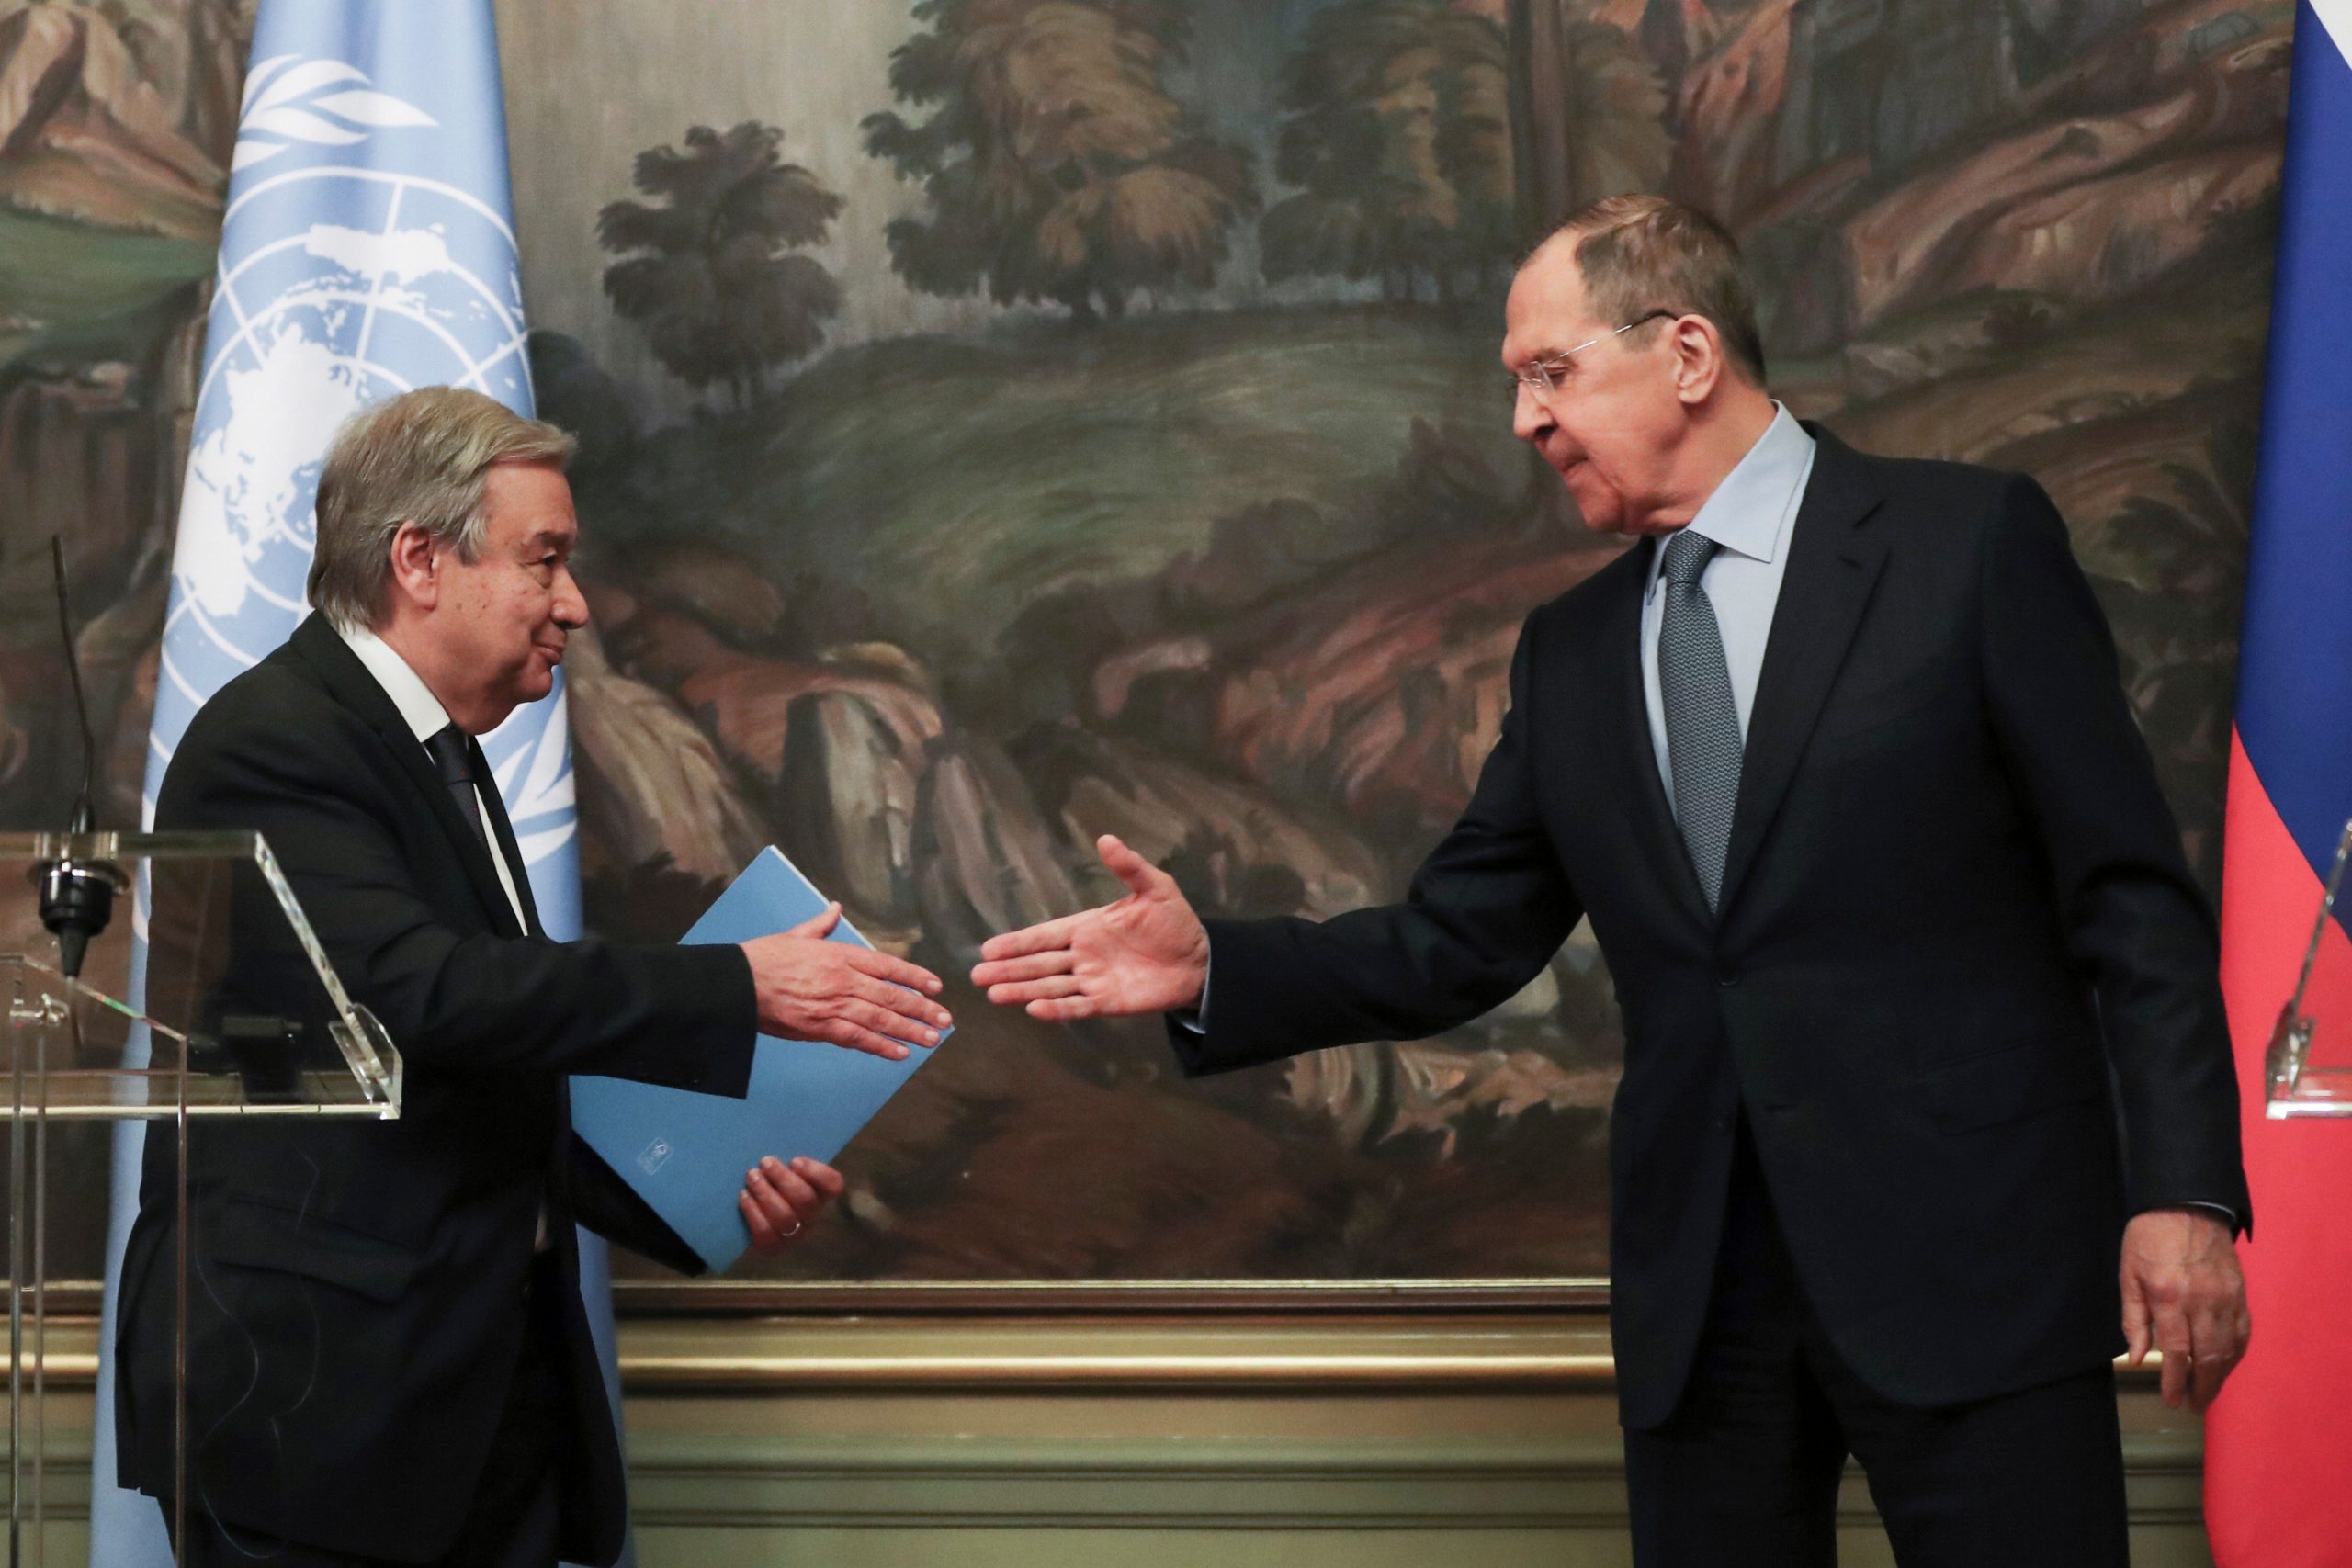 Lavrov claims Ukraine situation is ‘catalyst’ for other problems, appreciates Guterres’ move